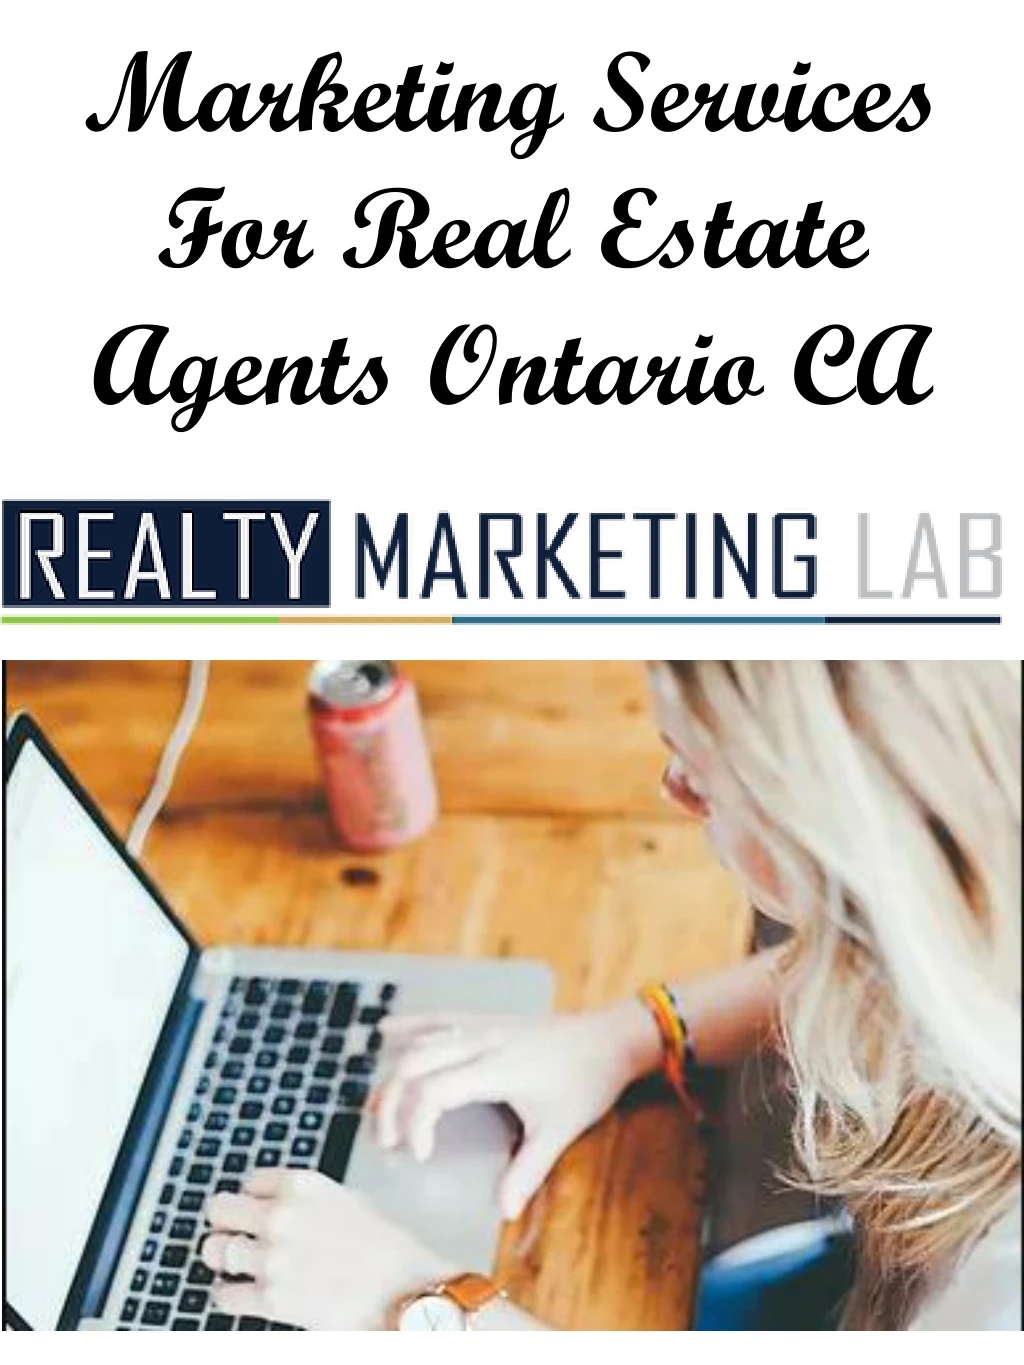 marketing services for real estate agents ontario ca